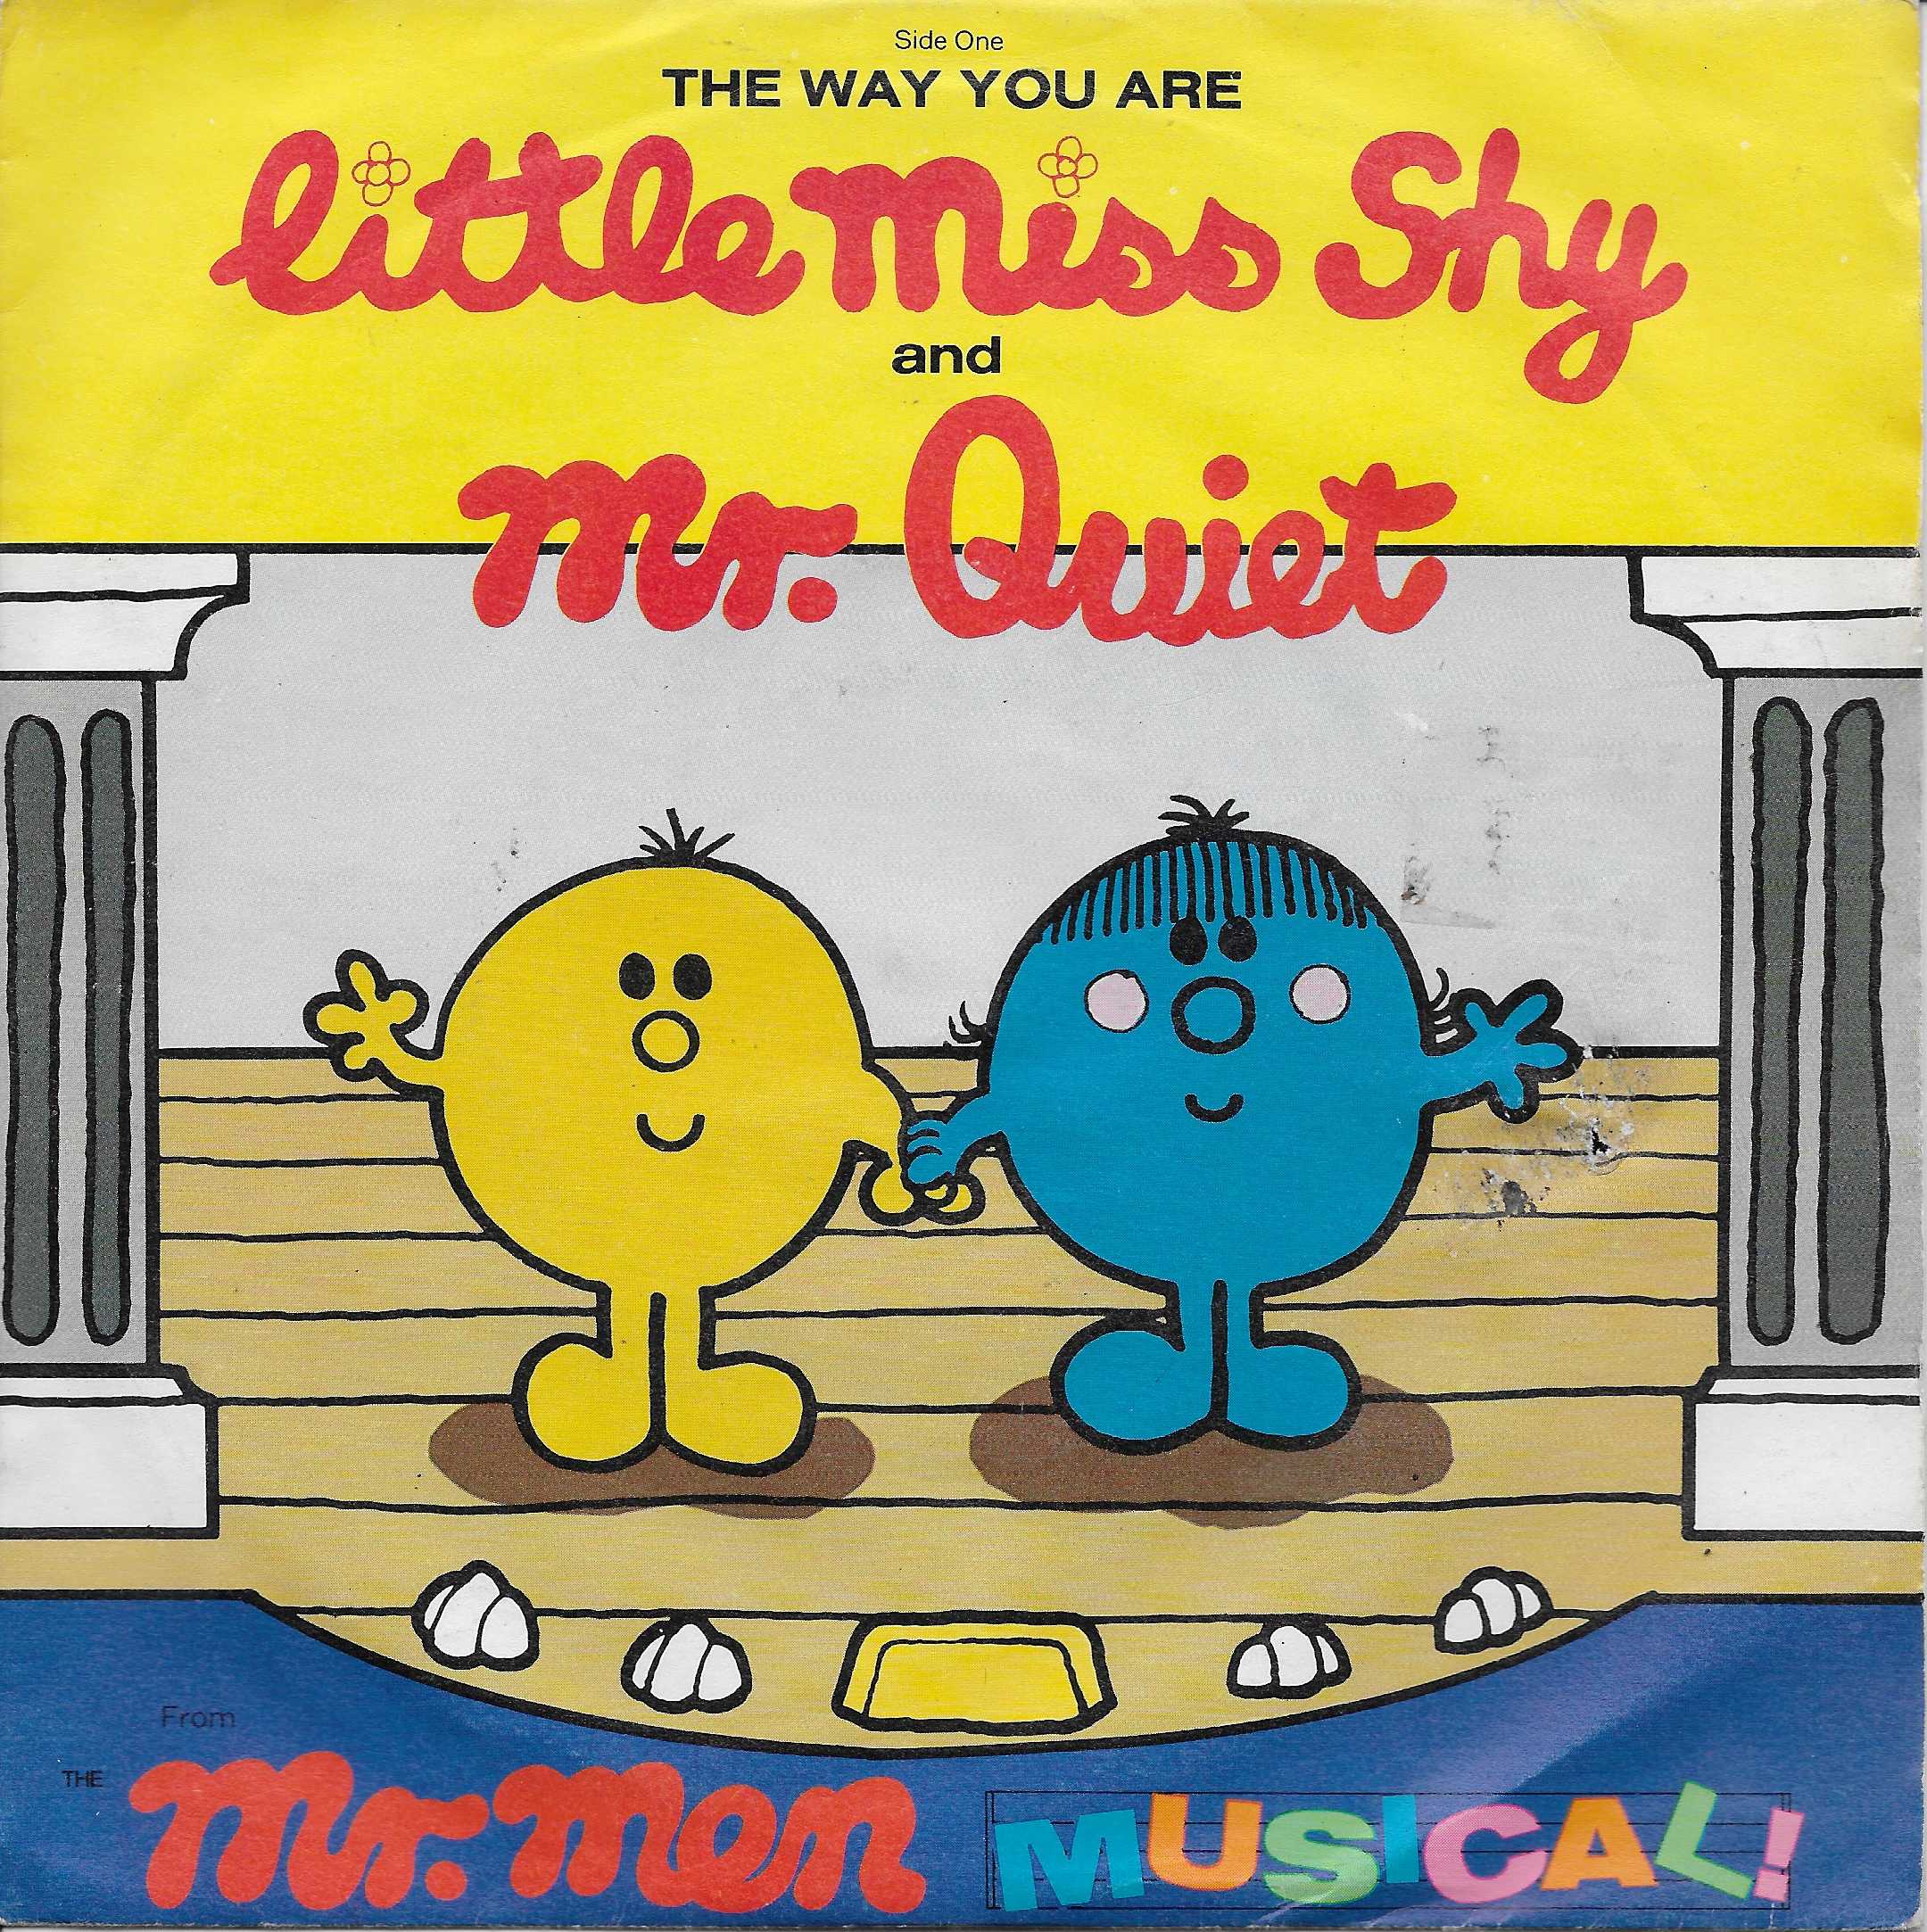 Picture of Mister men - Mr Quiet, Little Miss Shy by artist Roger Hargreaves from the BBC singles - Records and Tapes library